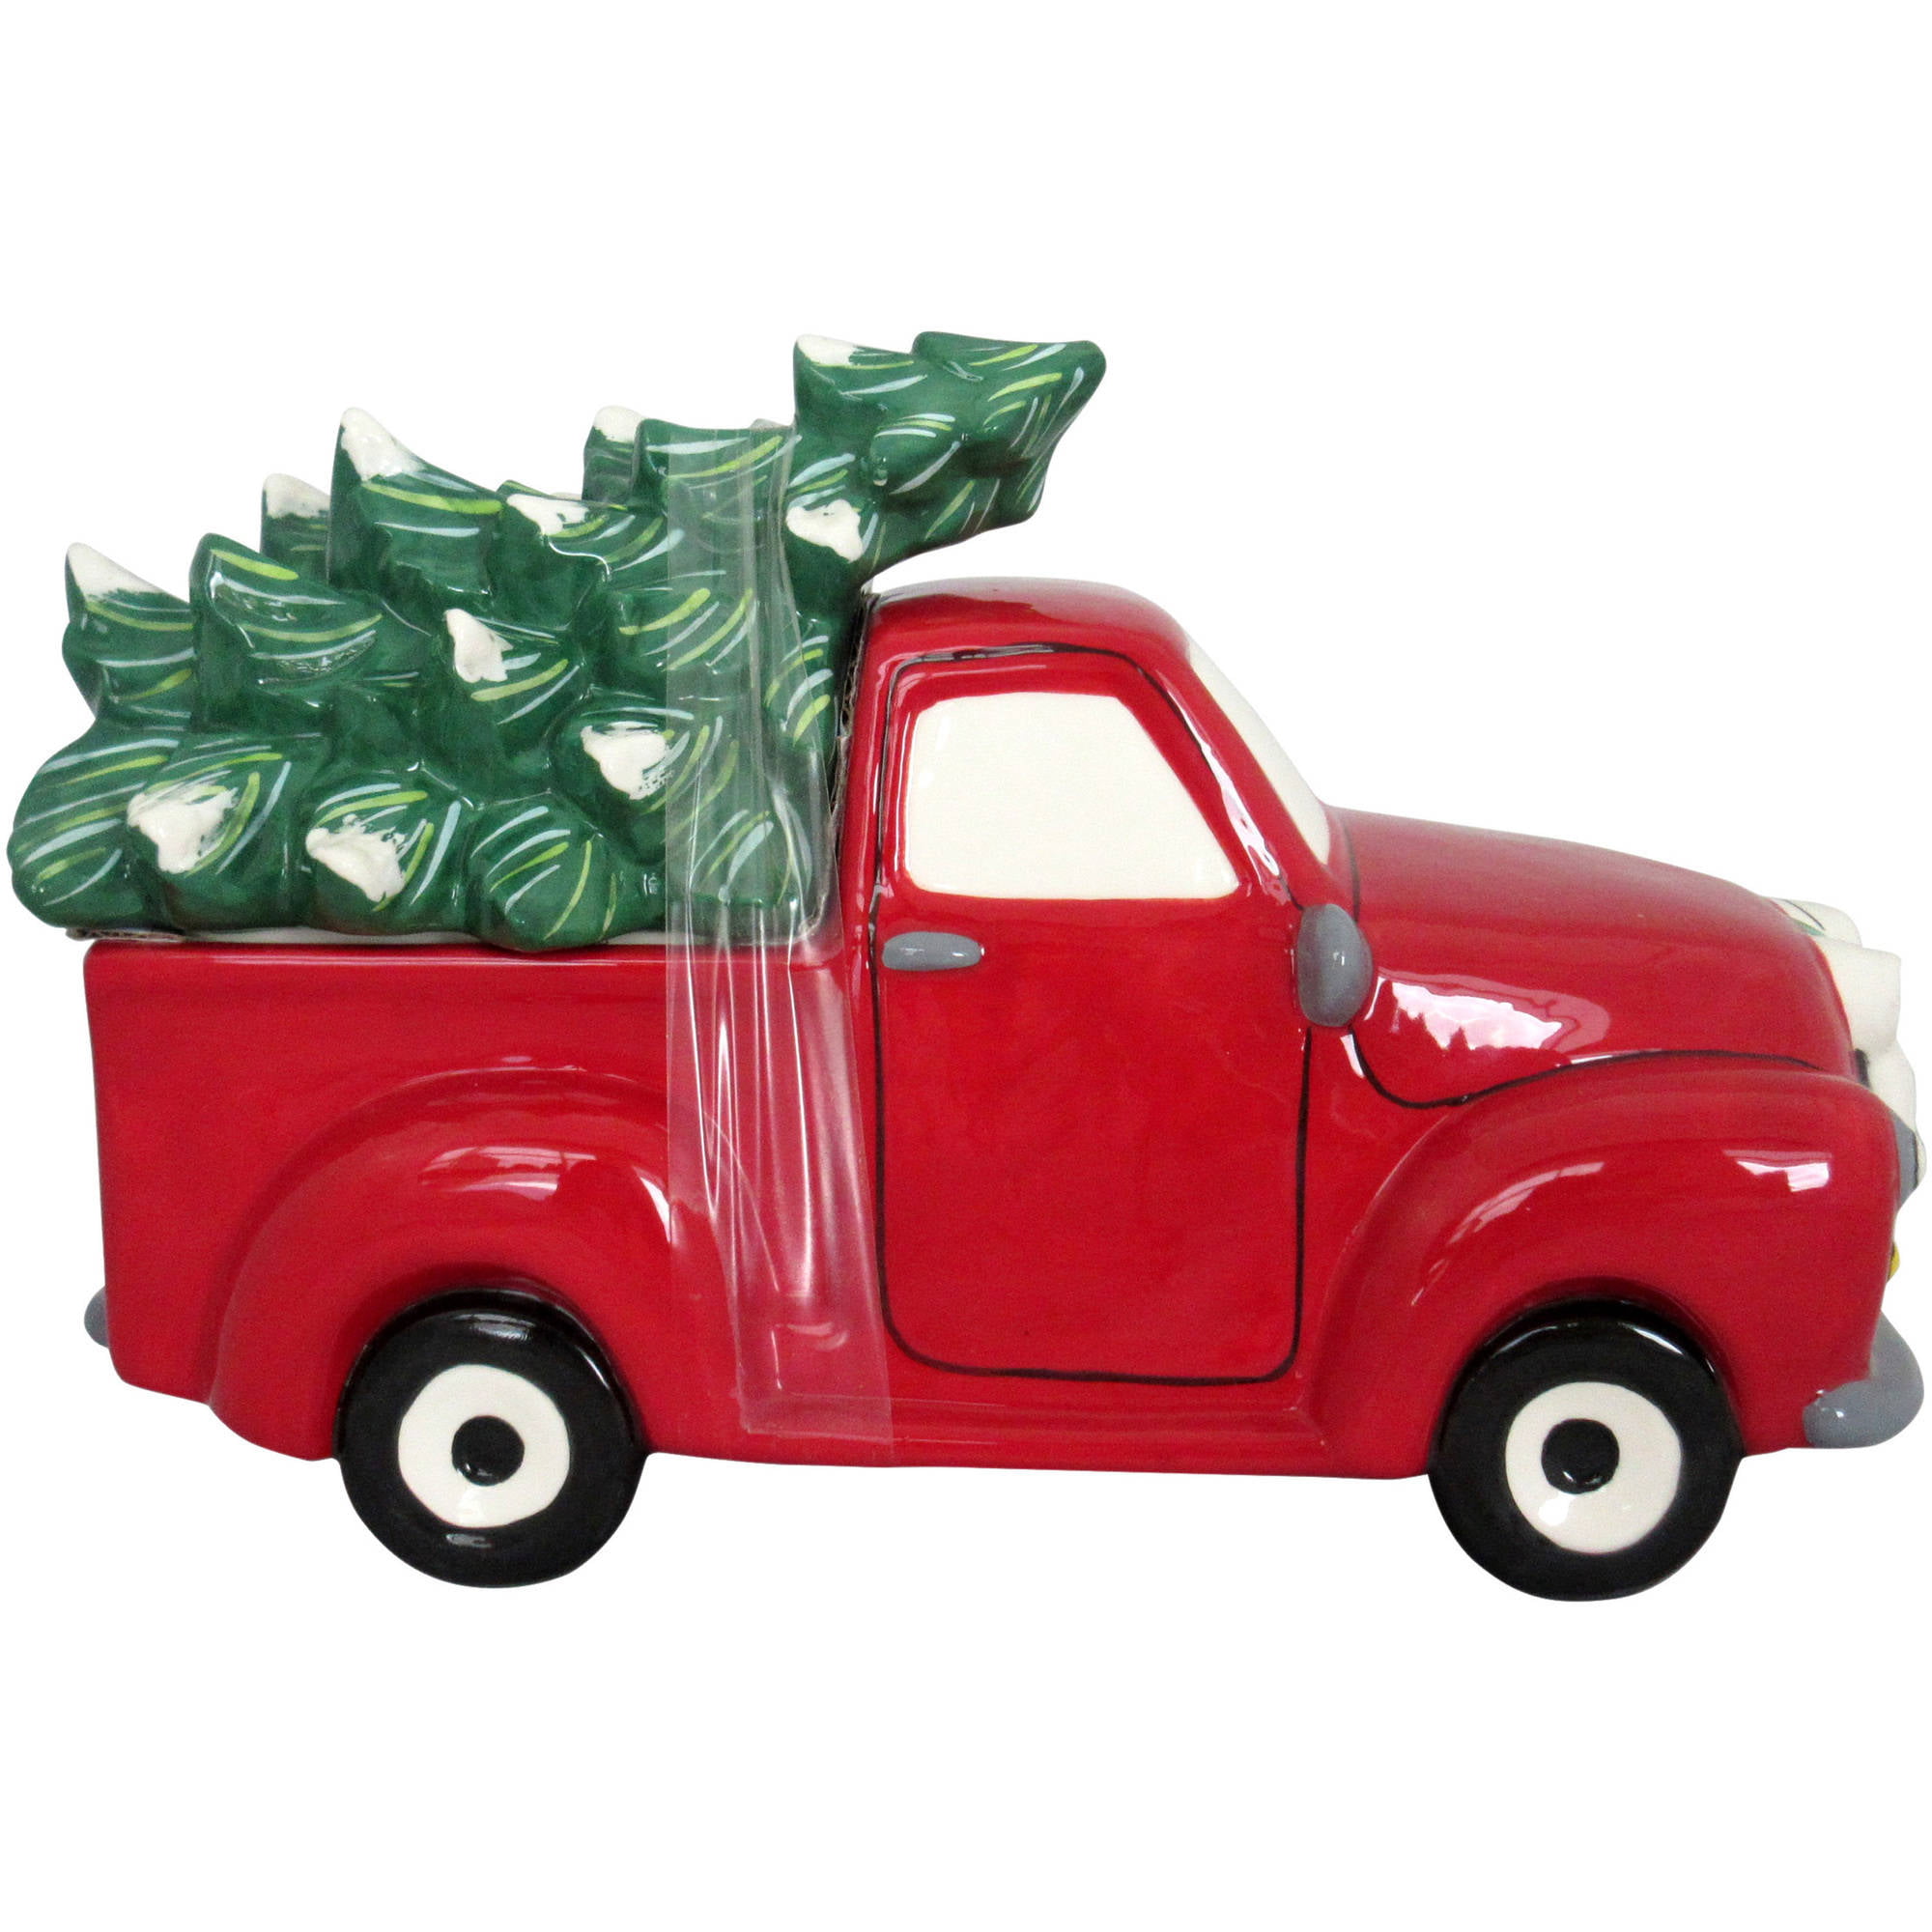 Featured image of post Red Truck Cookie Jar - This red truck christmas cookie jar is a wonderful addition to your decorating accessories and will be sure to get you in the holiday spirit and ready to celebrate.